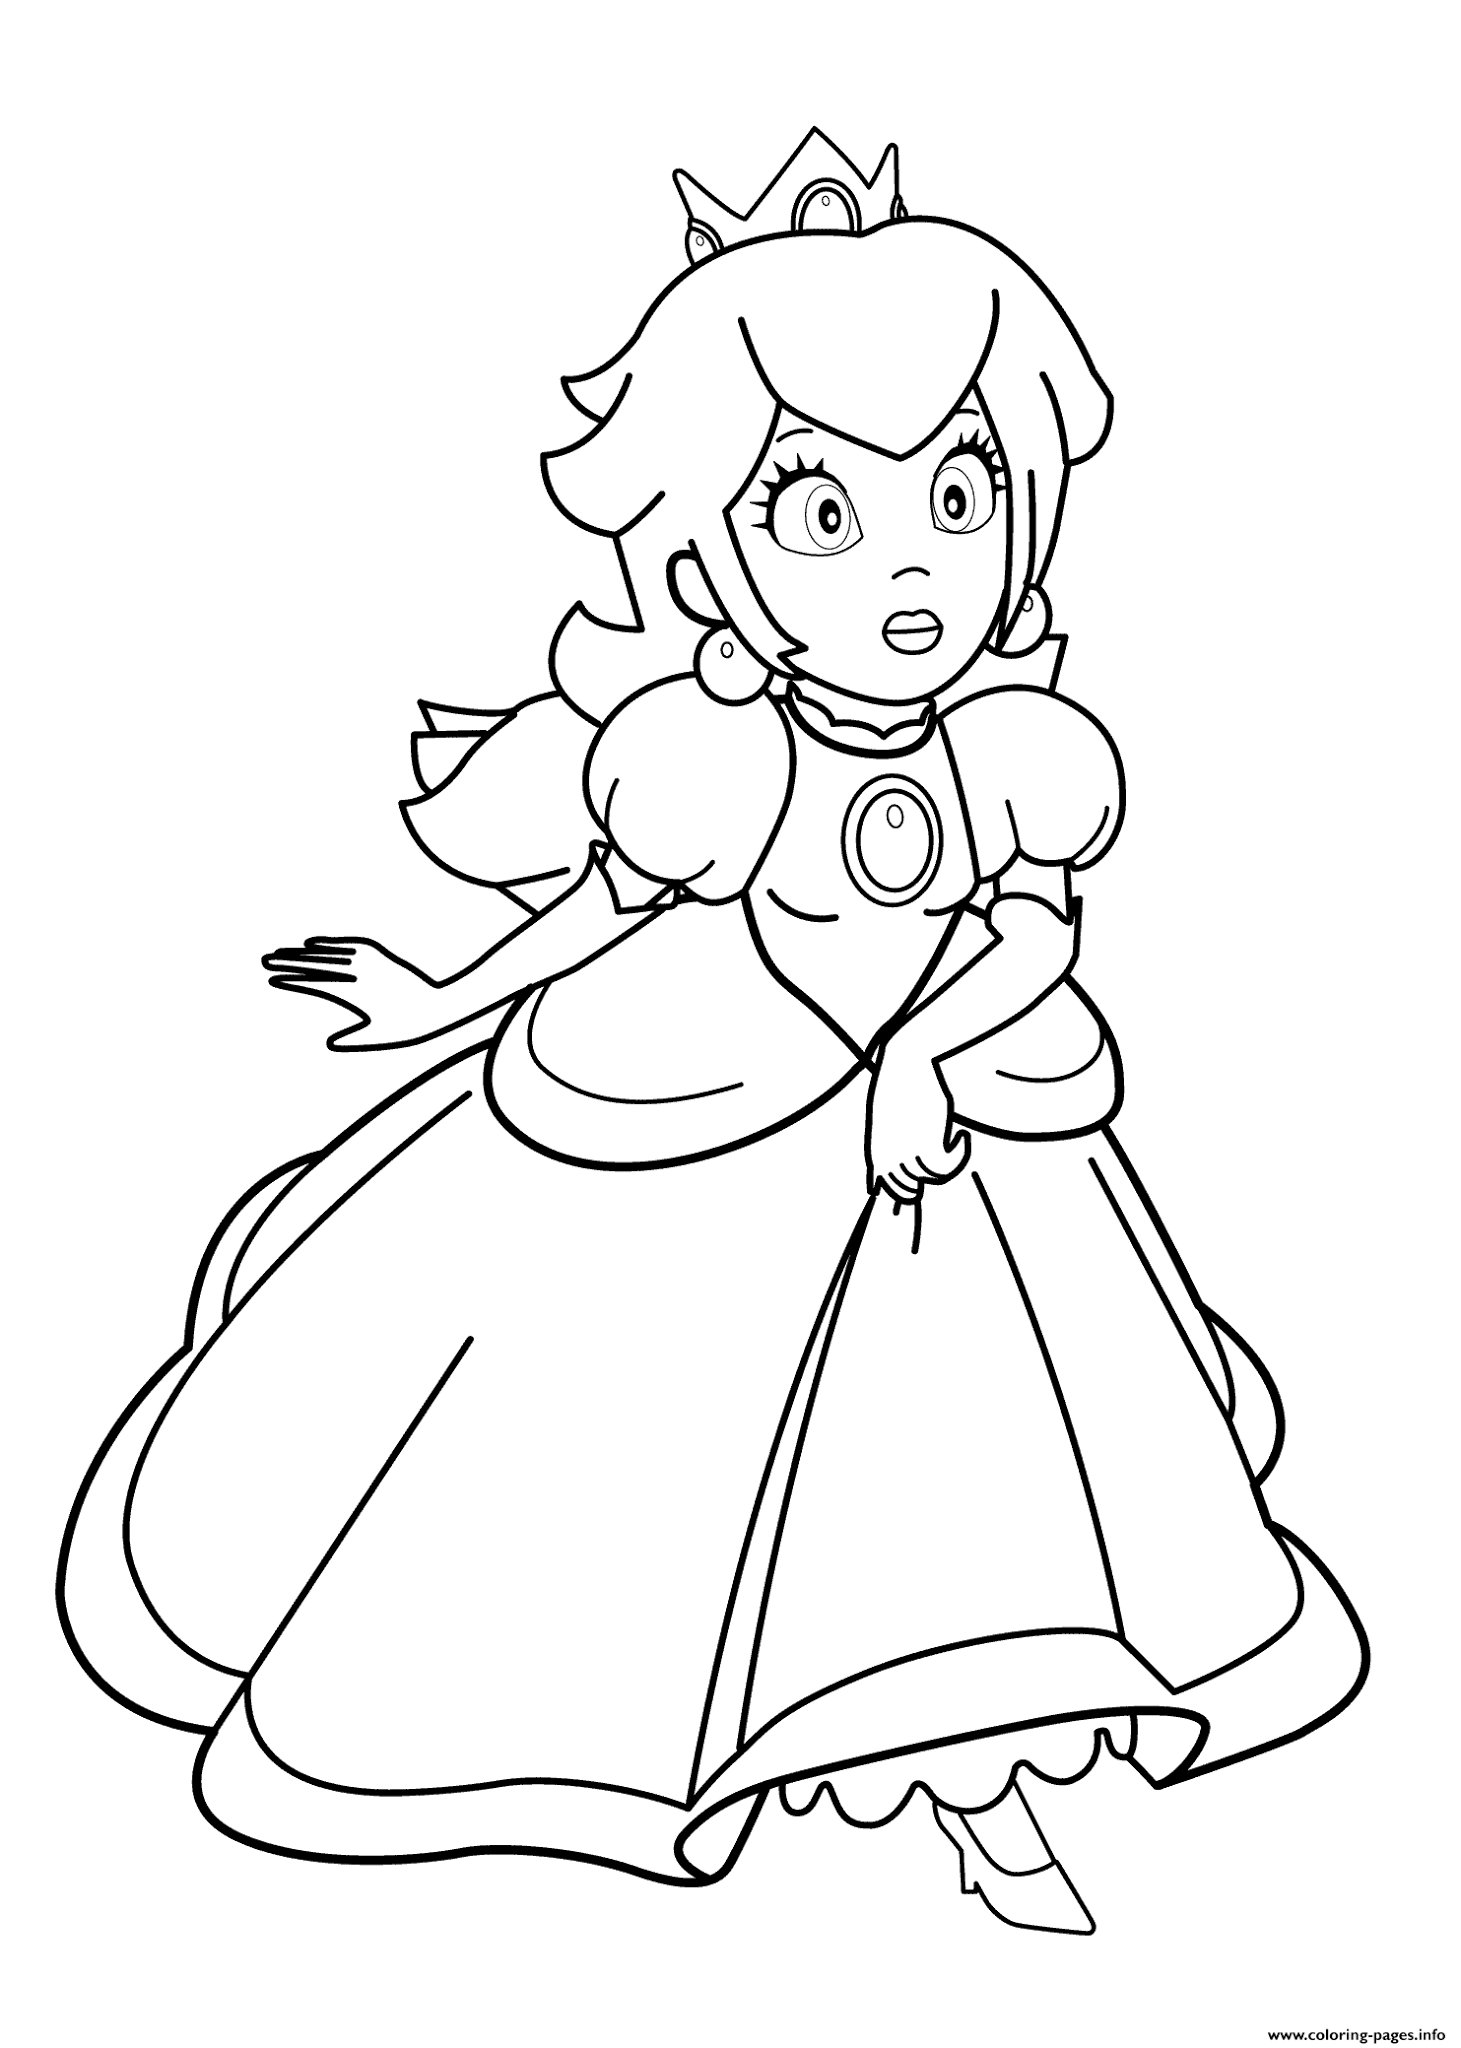 Princess Peach Coloring Page ~ Coloring Pages